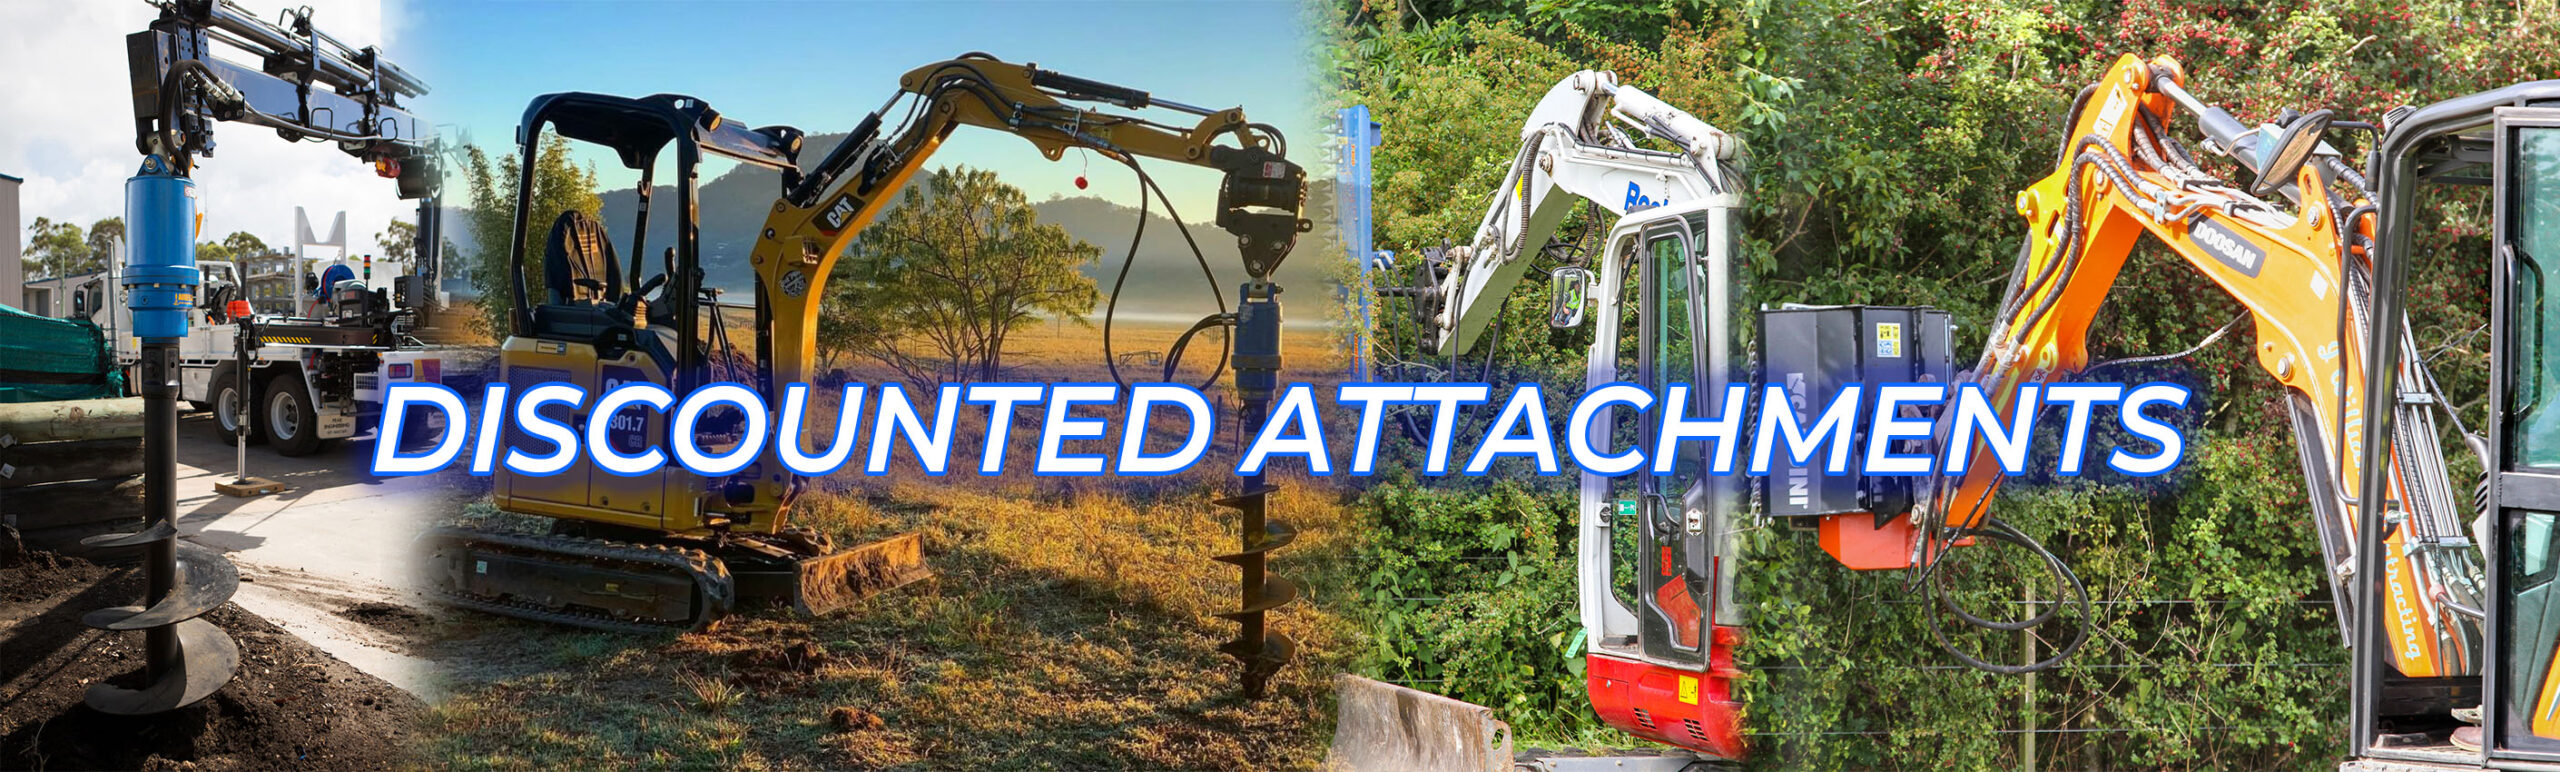 Discounted Attachments Banner 2 scaled